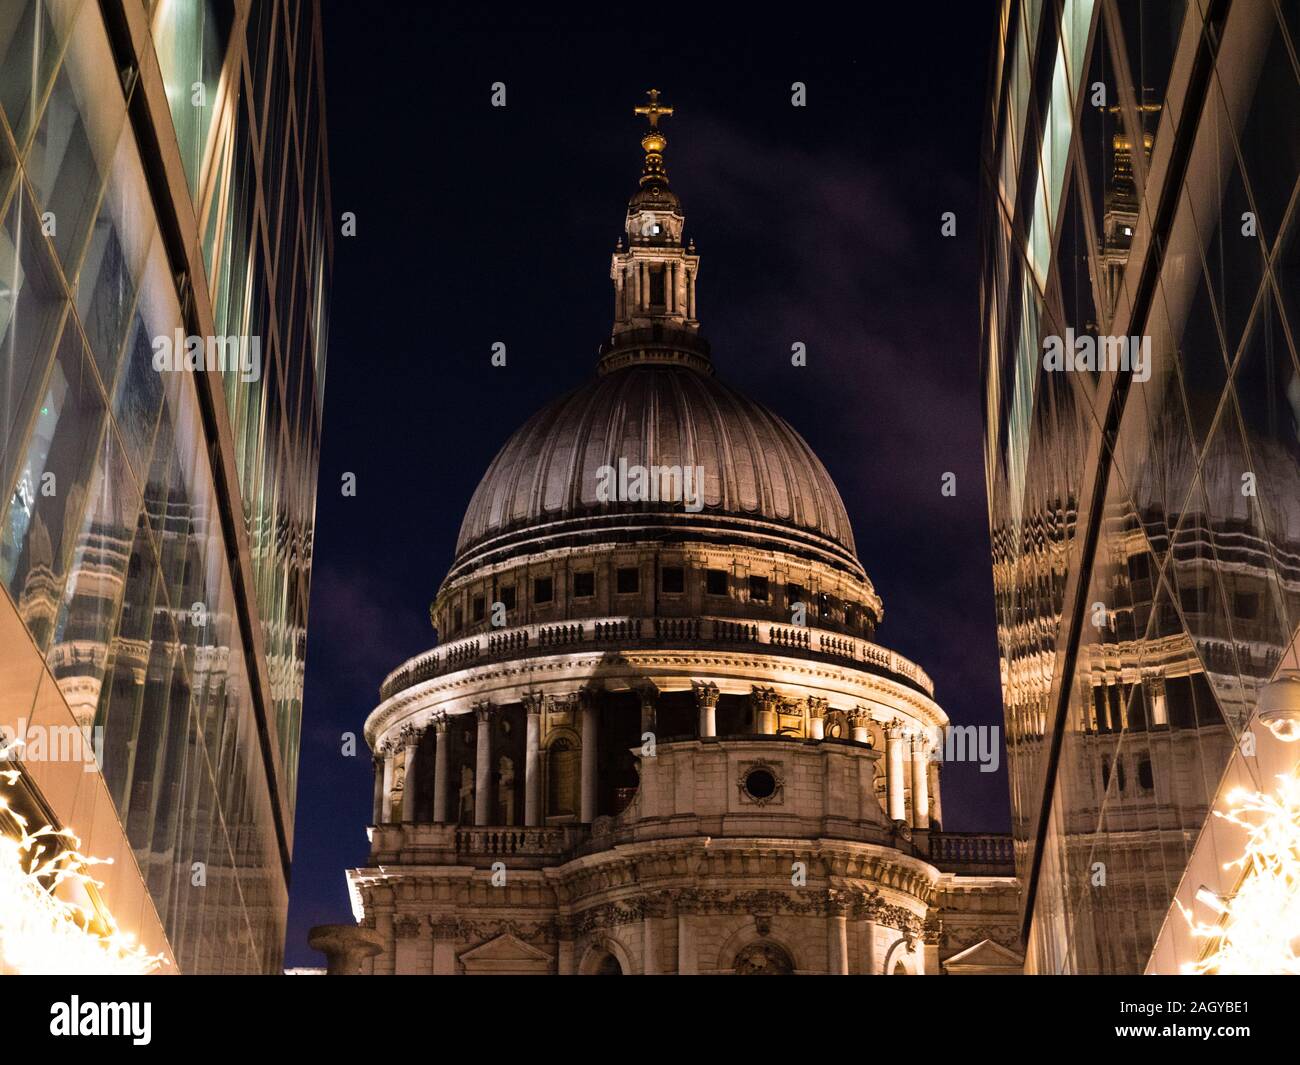 St Paul's Cathedral, Night Time, London, England, UK,GB. Stock Photo